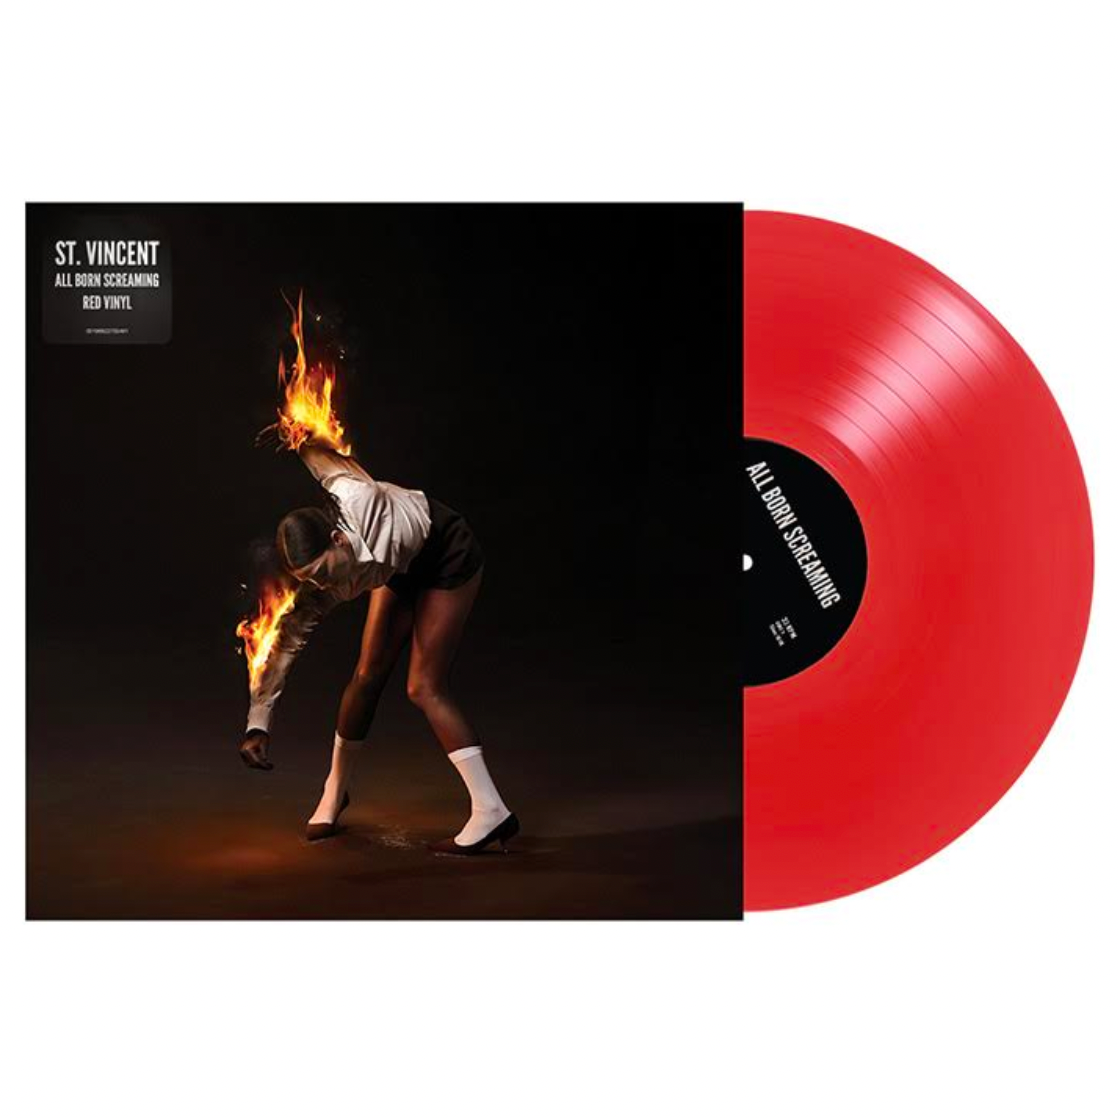 St Vincent 'All Born Screaming' LP